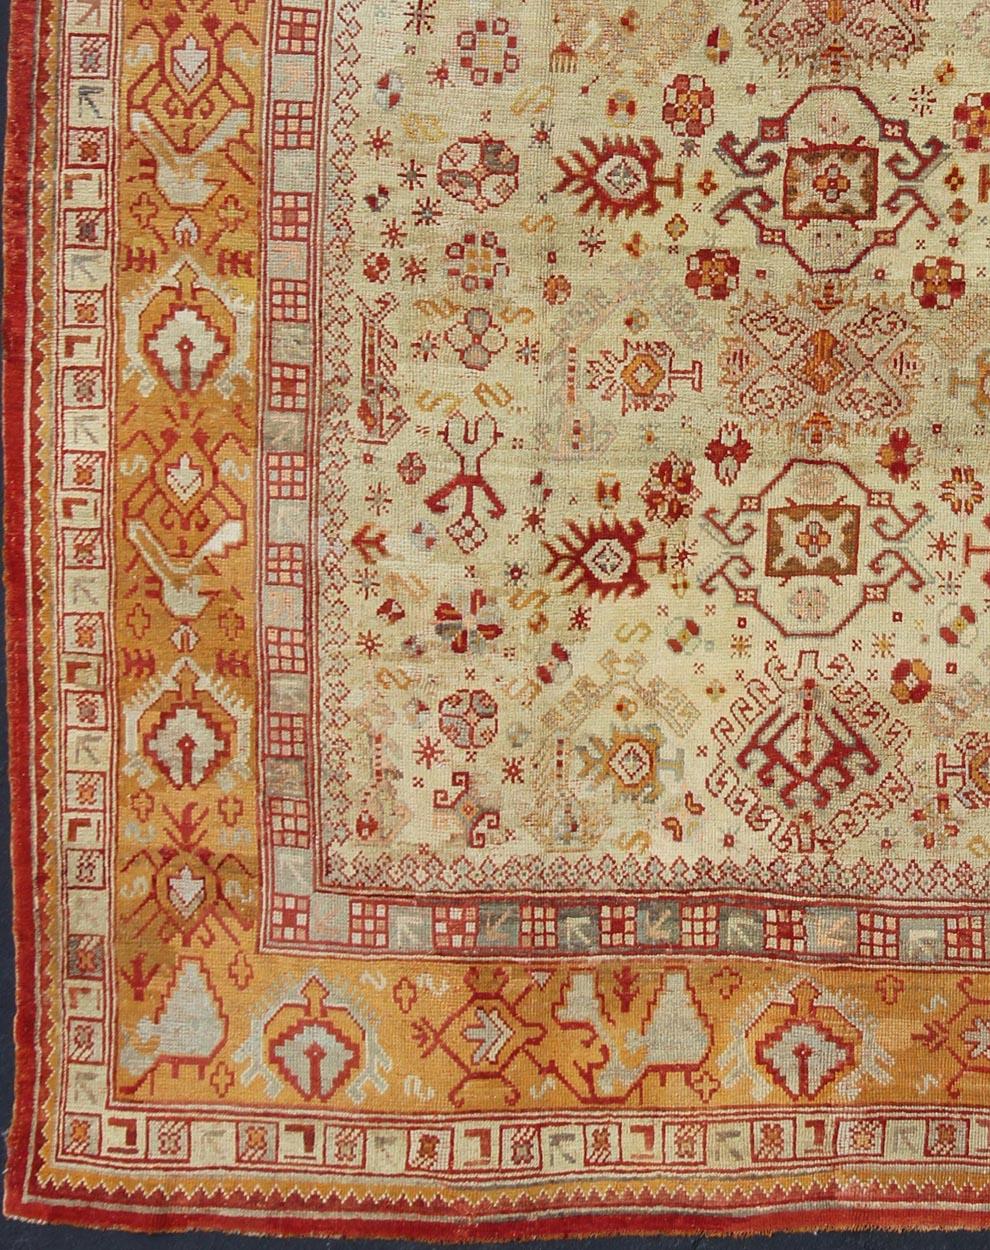 Antique Turkish Oushak Carpet With All-Over Design In Red, Taupe, and Orange. Keivan Woven Arts; rug G-0901, Country of Origin: Turkey Type: Antique Oushak Design: Floral, Sub-Geometric, All-Over.
Measures: 10'5 x 12'5.
This impressive Oushak carpet